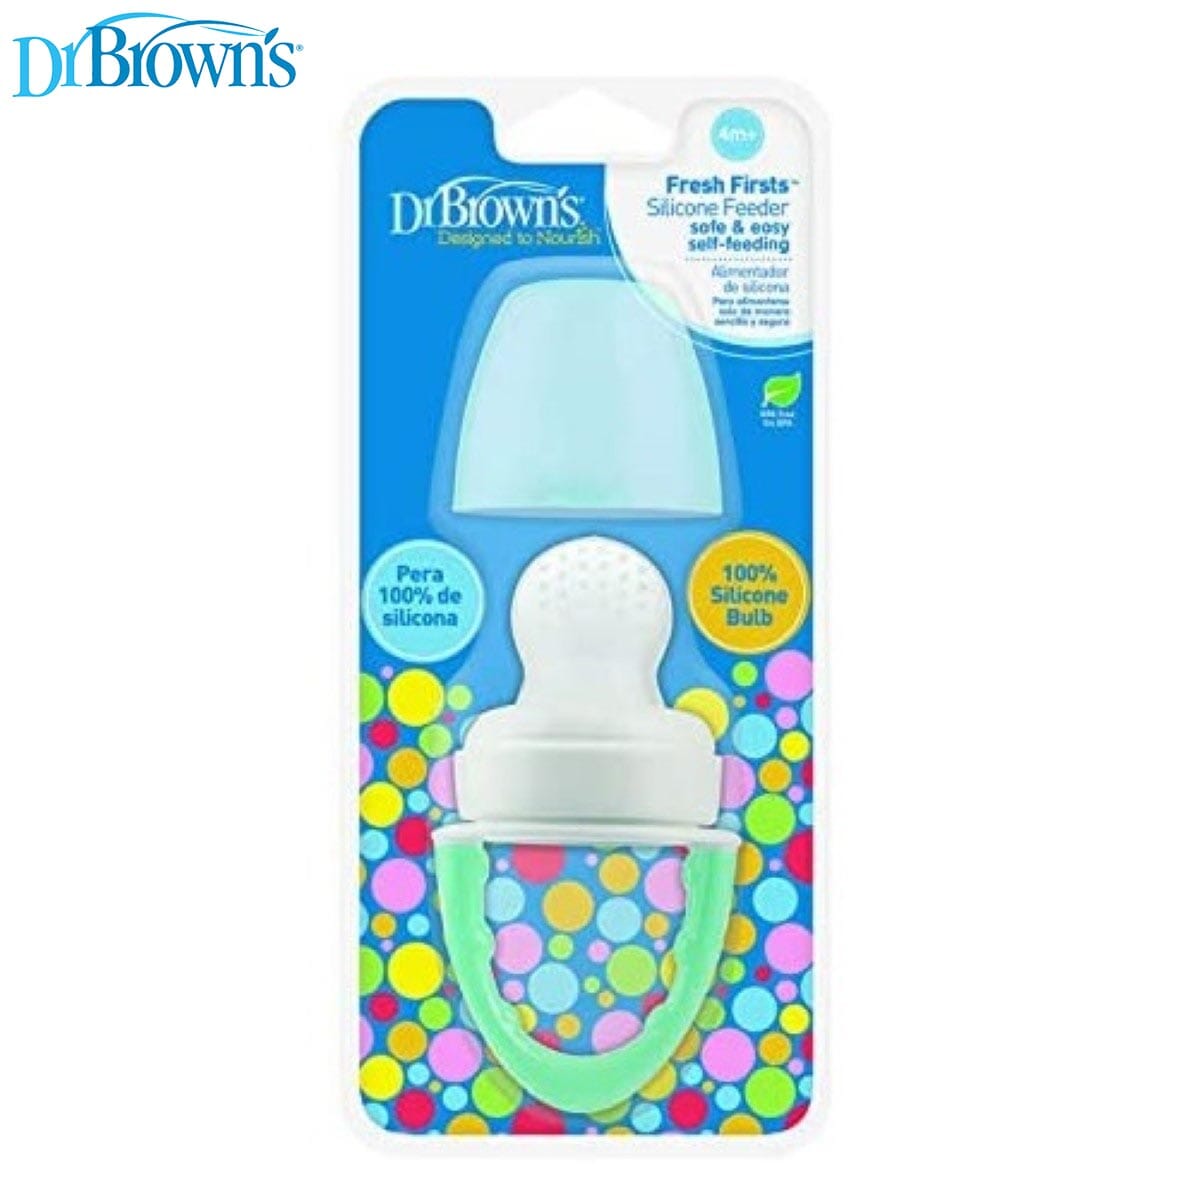 Dr. Browns Fresh Firsts Silicone Feeder, 1-Pack - Mint - DBTF006-P3